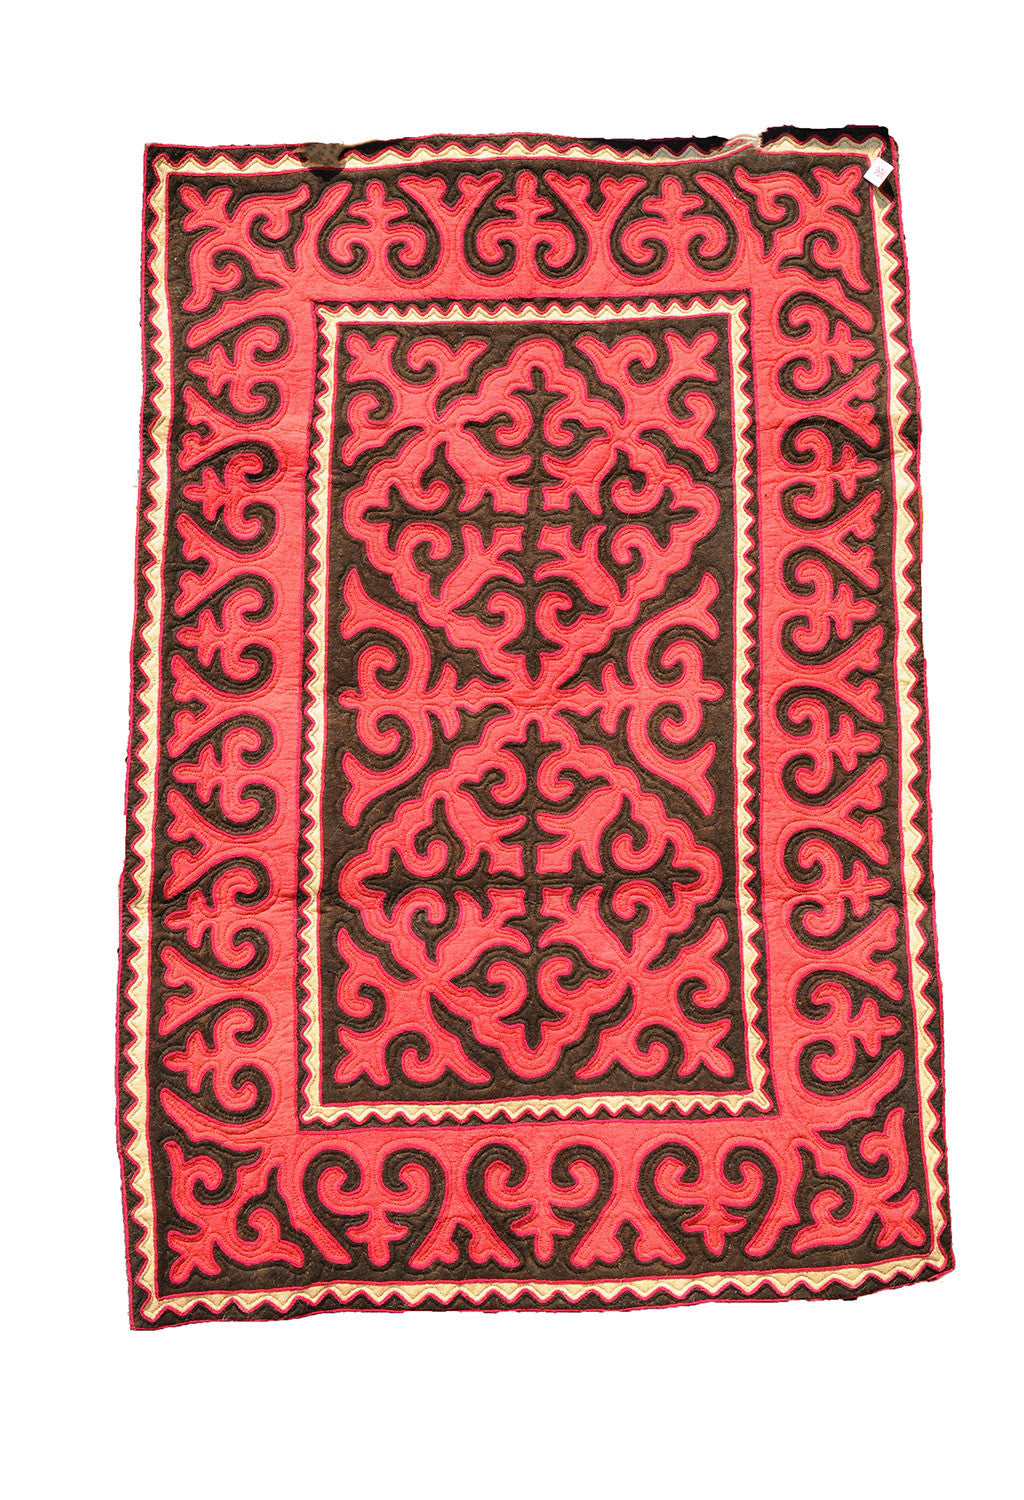 Large Red and Brown Rug with Flourets